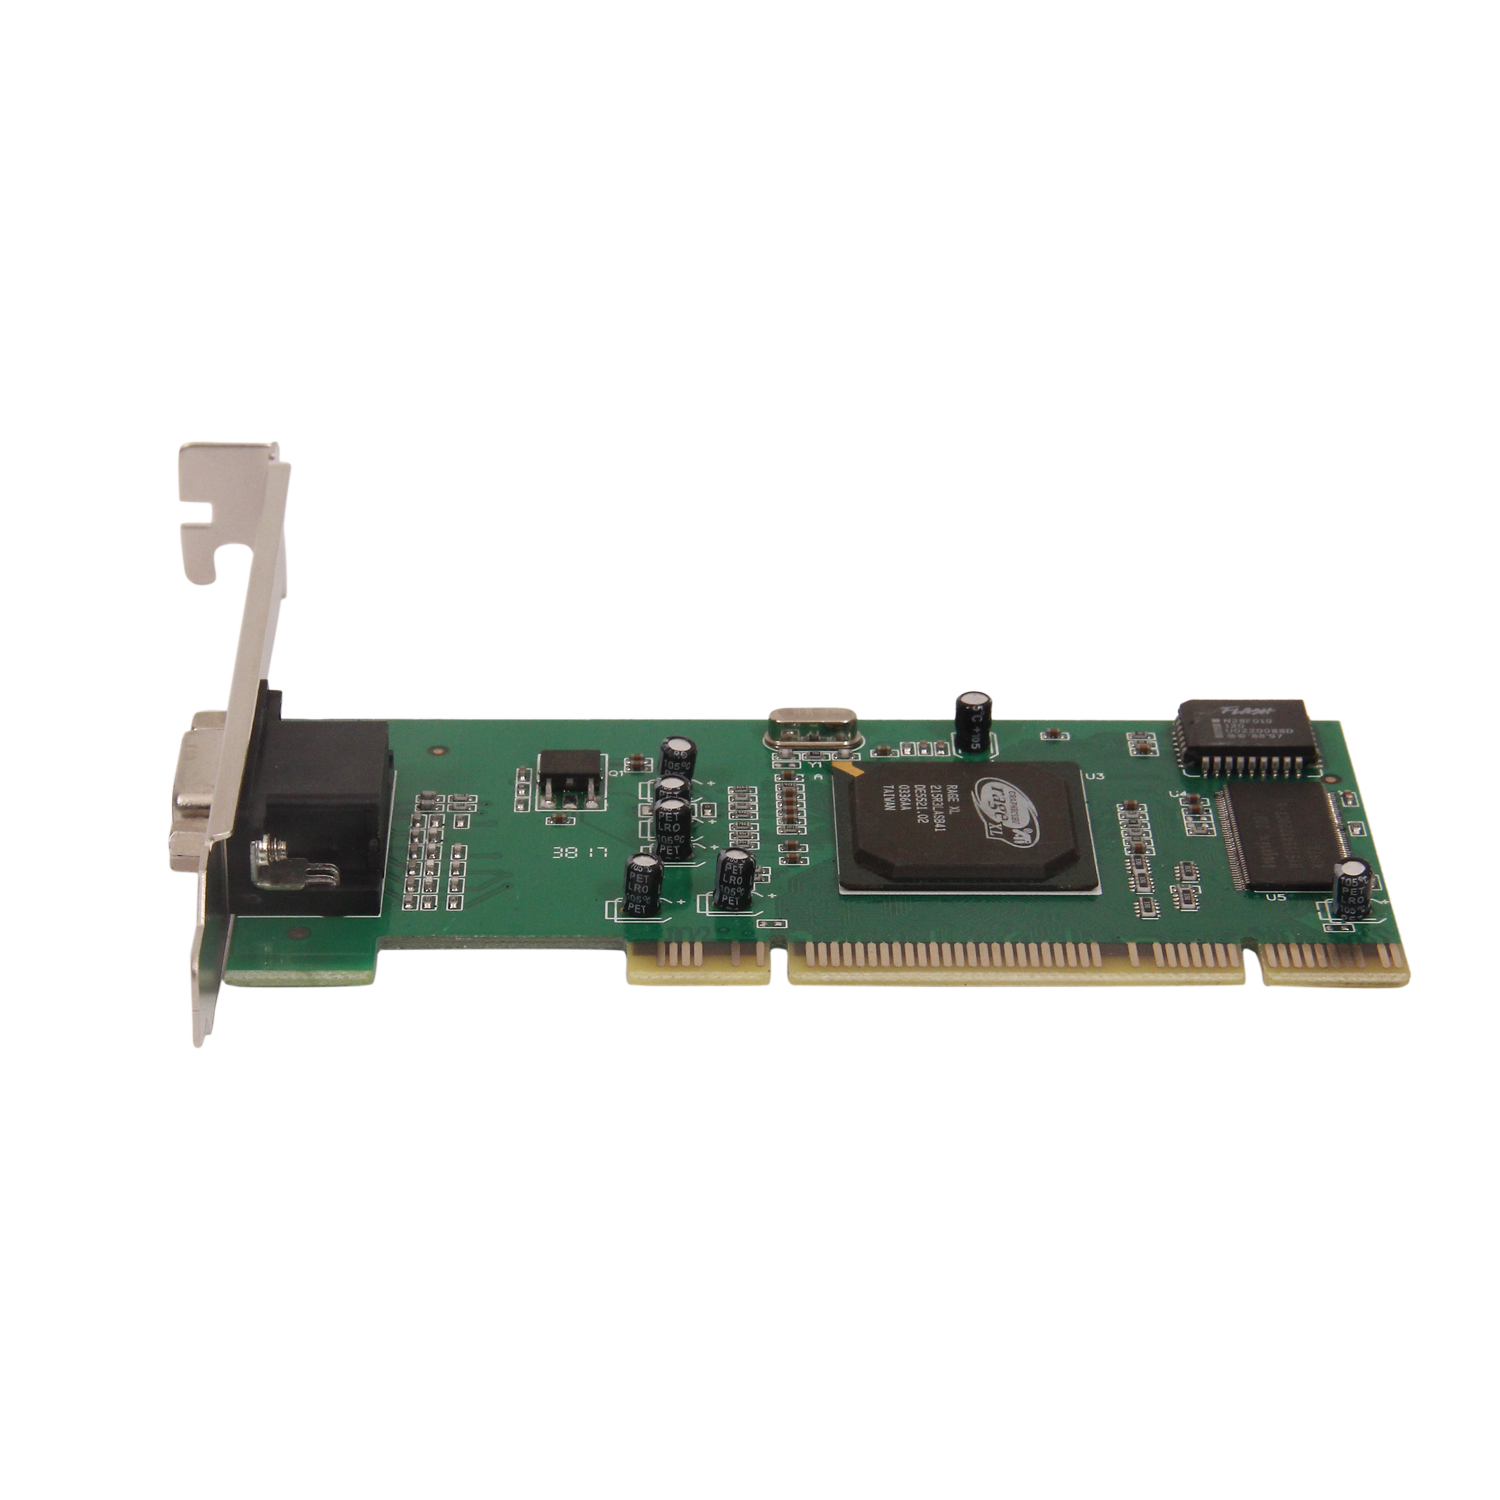 VGA Card at Best Price - Buy Best PCI VGA Graphic Card 8MB Online